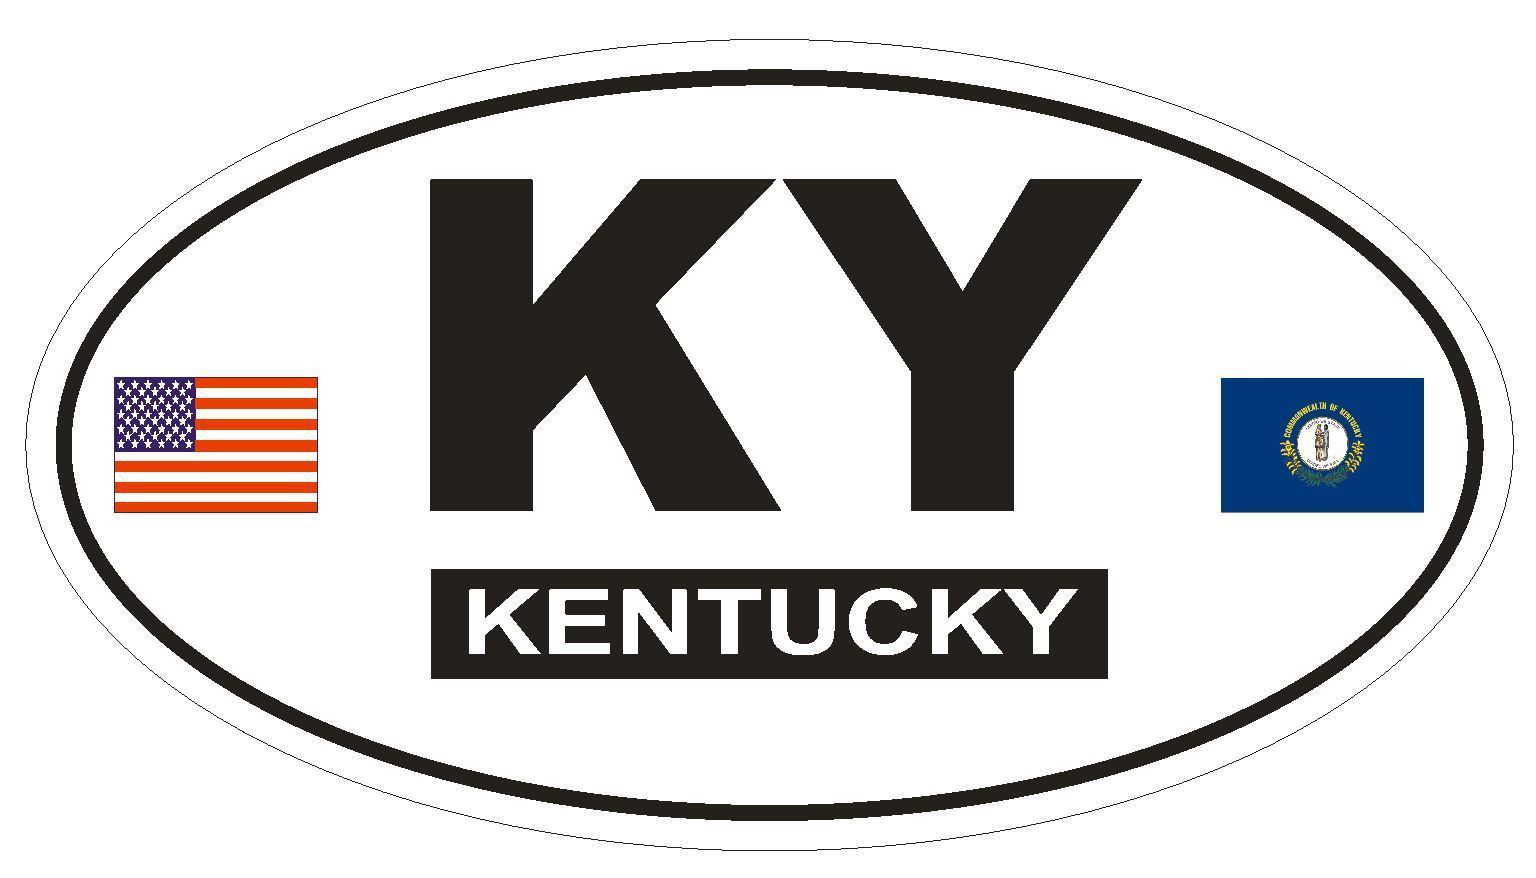 Primary image for KY Kentucky Oval Bumper Sticker or Helmet Sticker D797 Euro Oval with Flags